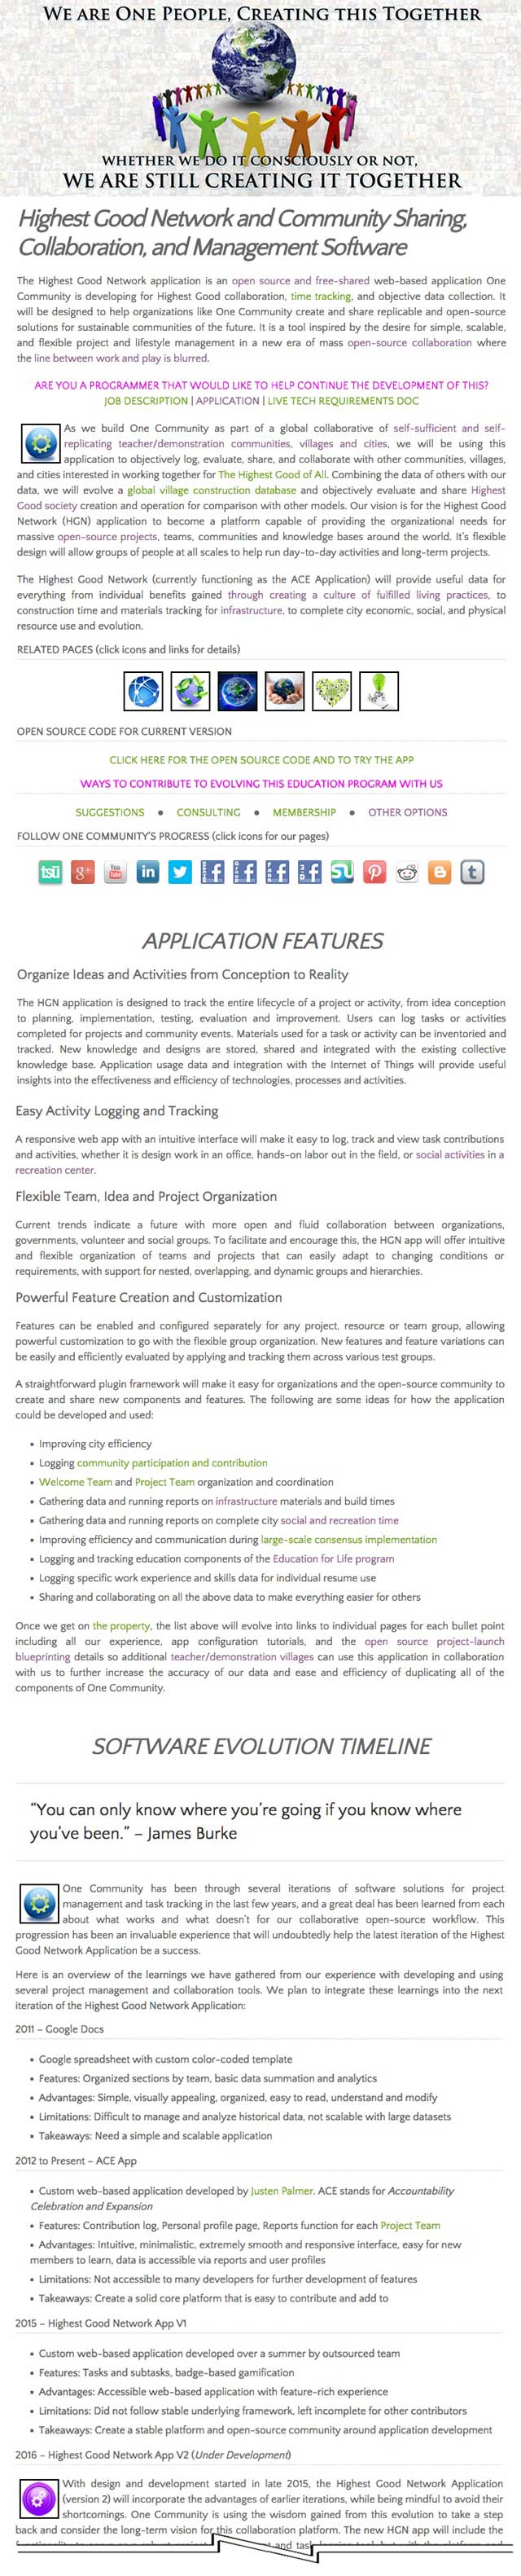 This last week the core team began updating the Highest Good Network page with what has been weeks of work with Andrew Herman (Software Engineer and Core Member of Futurist Playground). This page shares the details of the open source software we’re creating together for complete teacher/demonstration hub management, data gathering, open source collaboration and more. We’d say this page is about 50% complete.